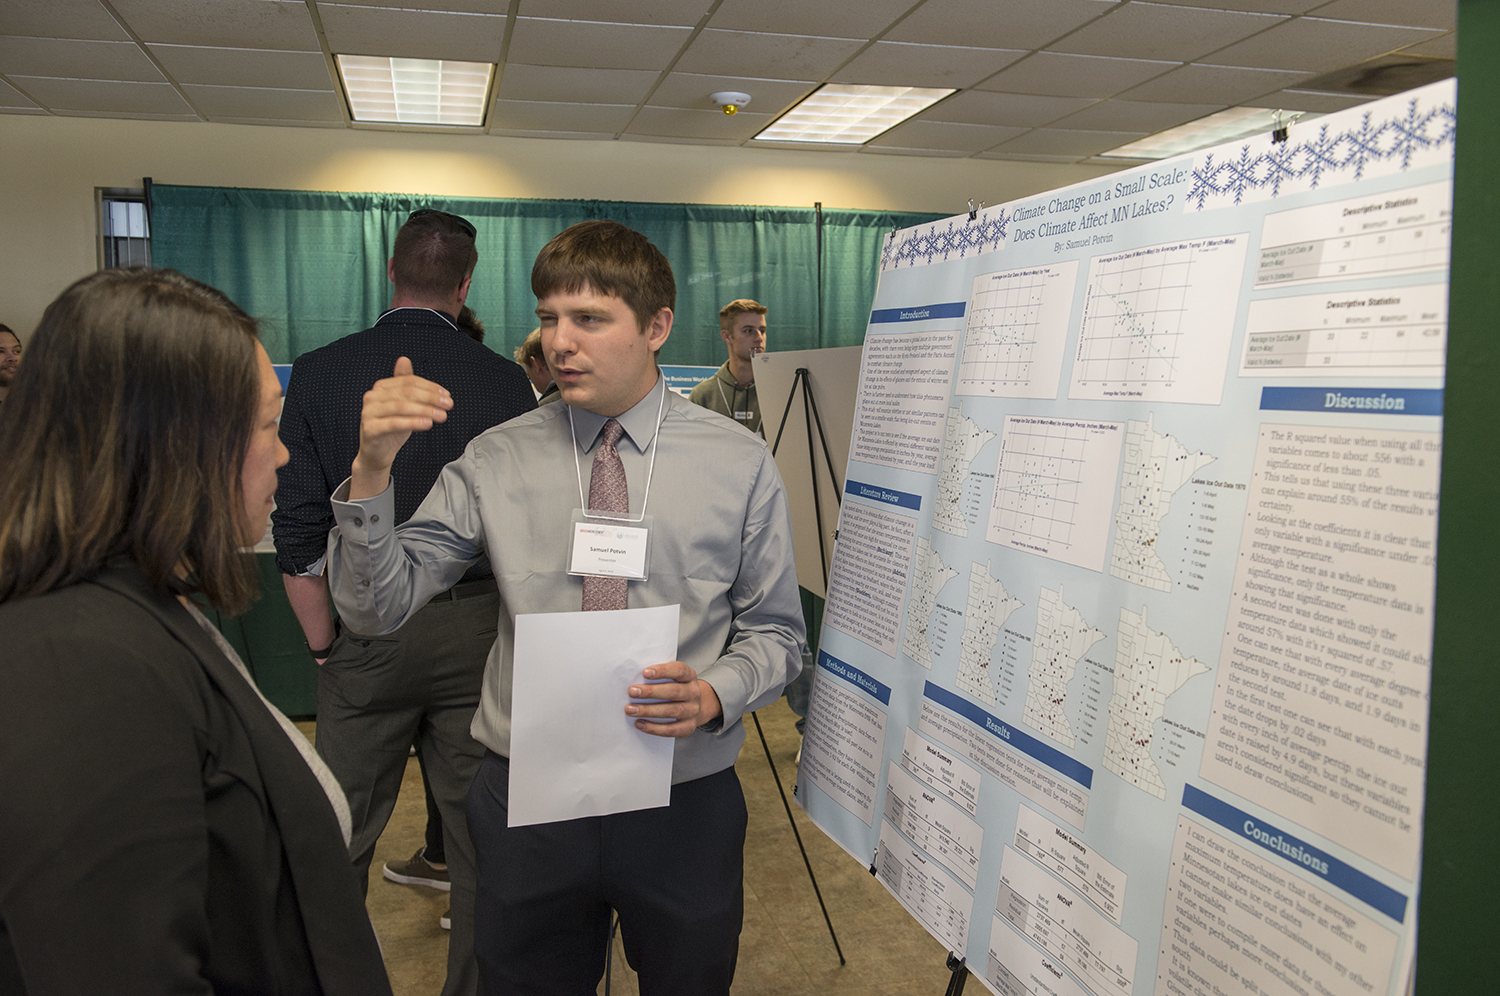 "Climate Change on a Small Scale: Does Climate Affect MN Lakes?" poster presentation by Samuel Potrin.